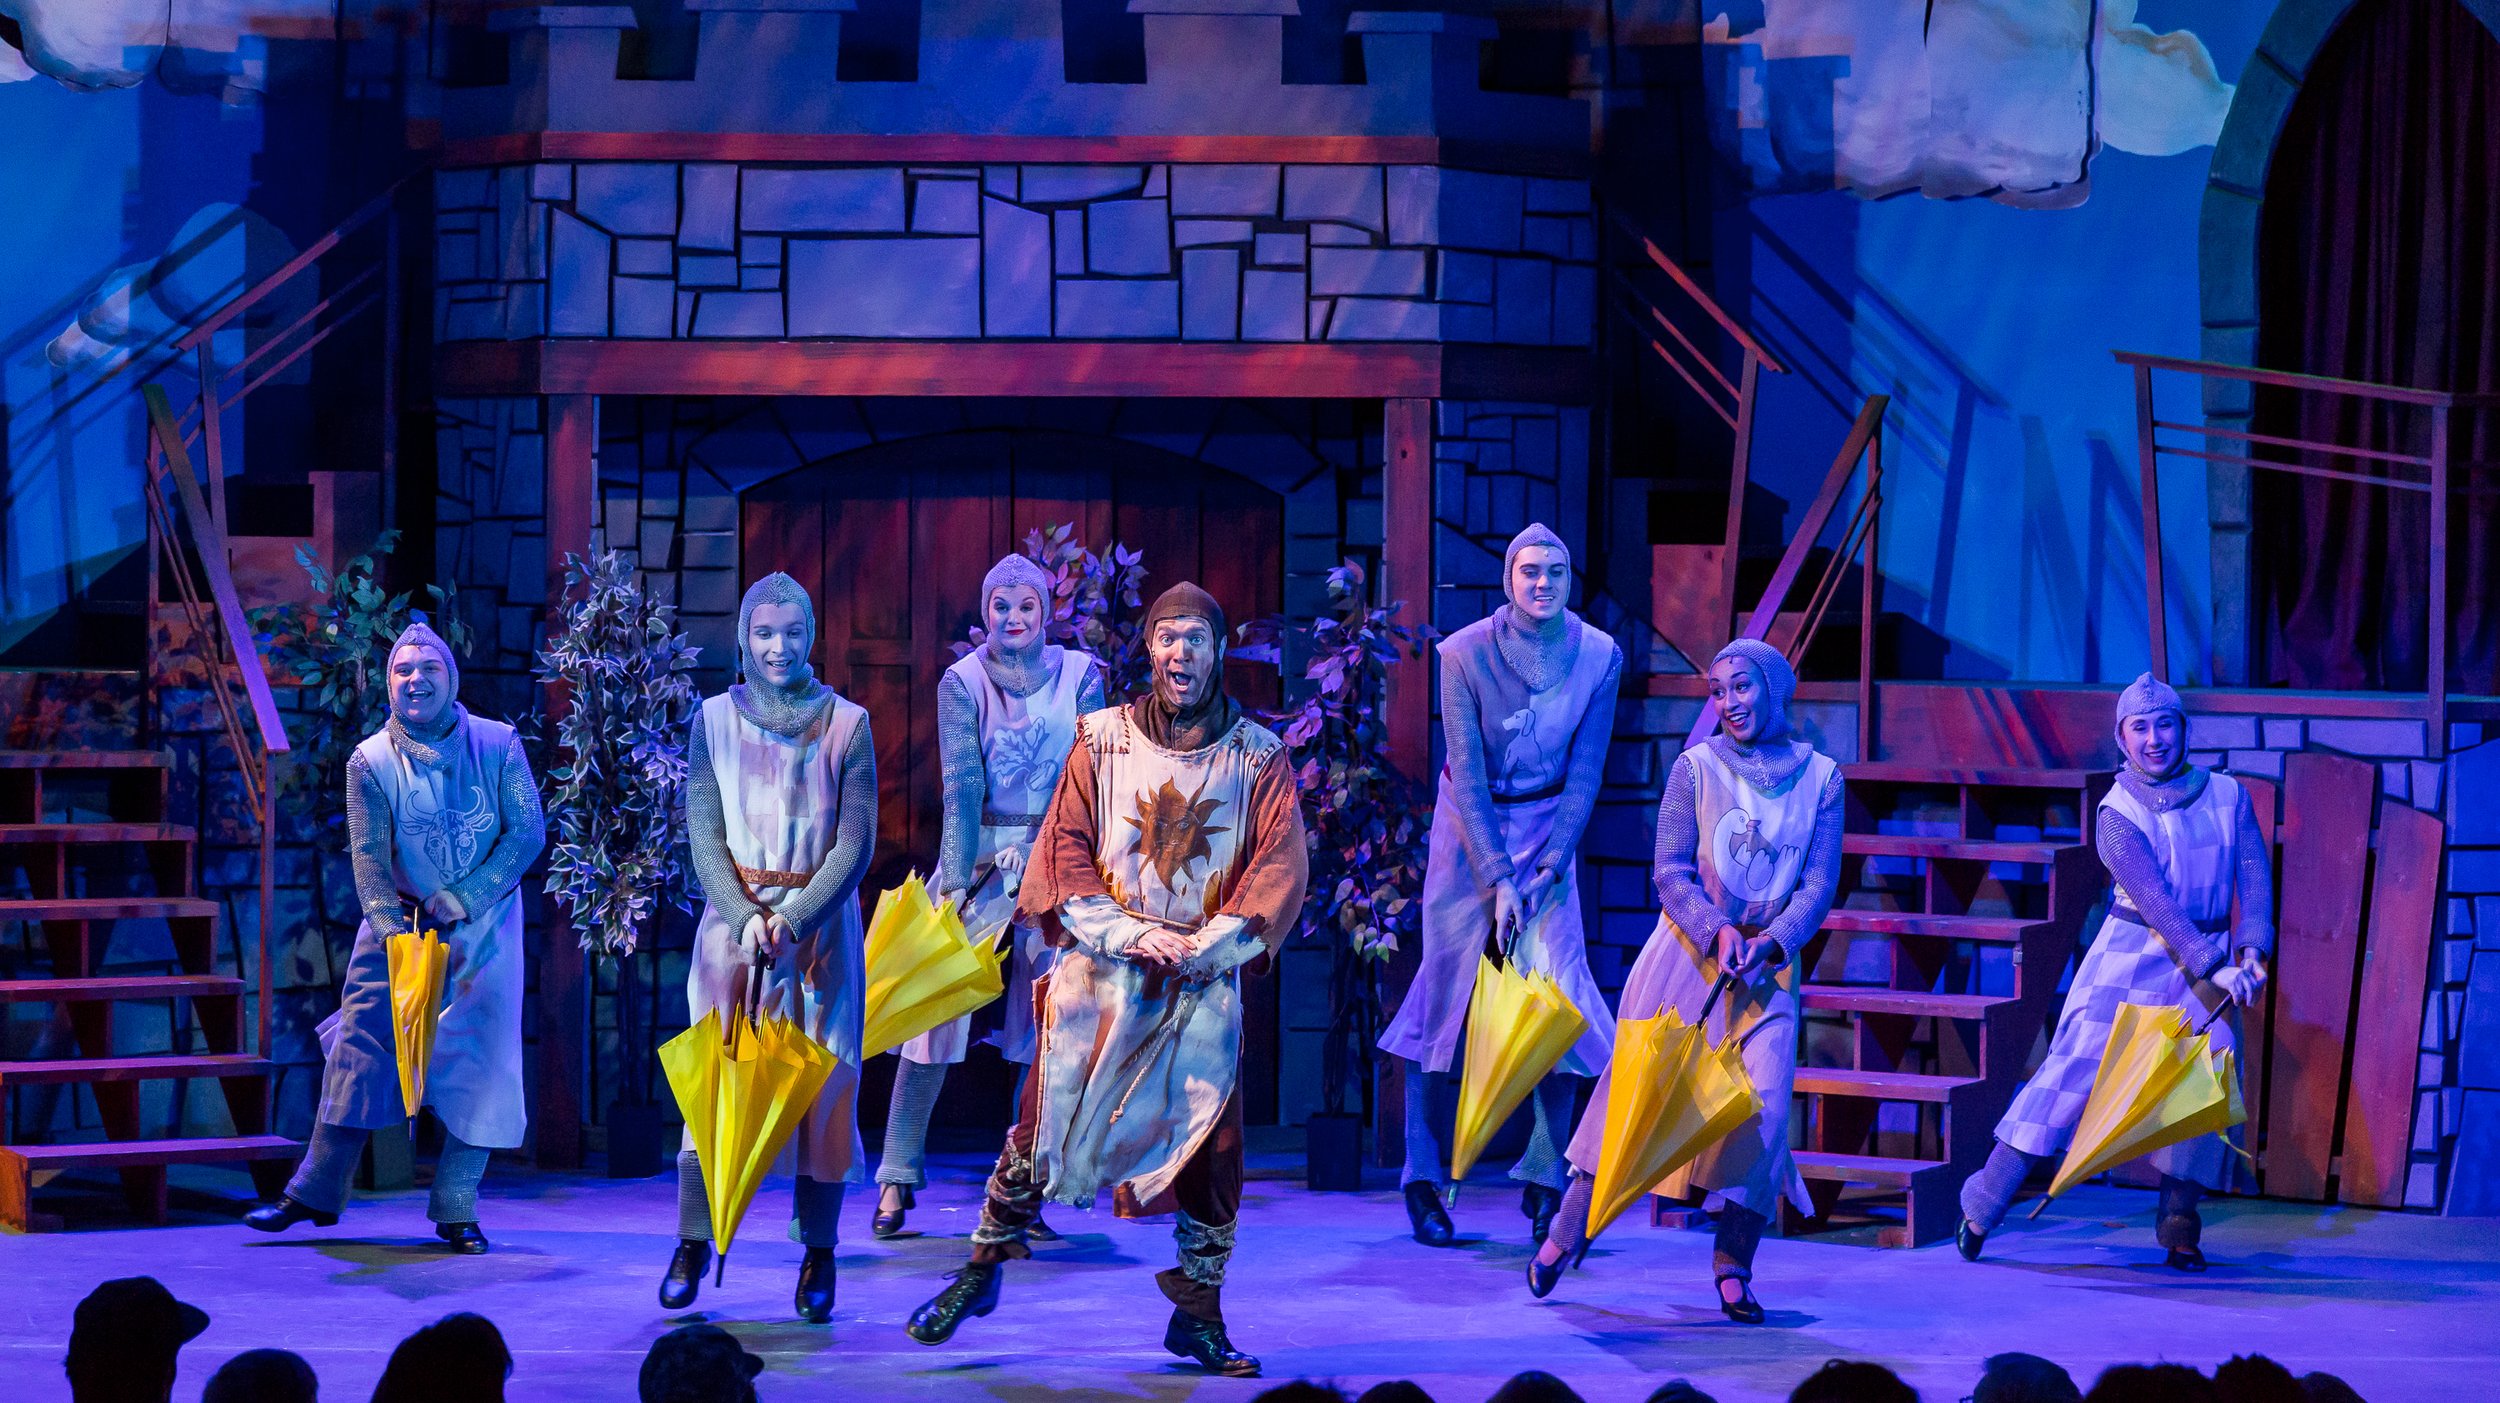 SpamalotActlIWide_Selects_HiRes_2O9A6585.jpg